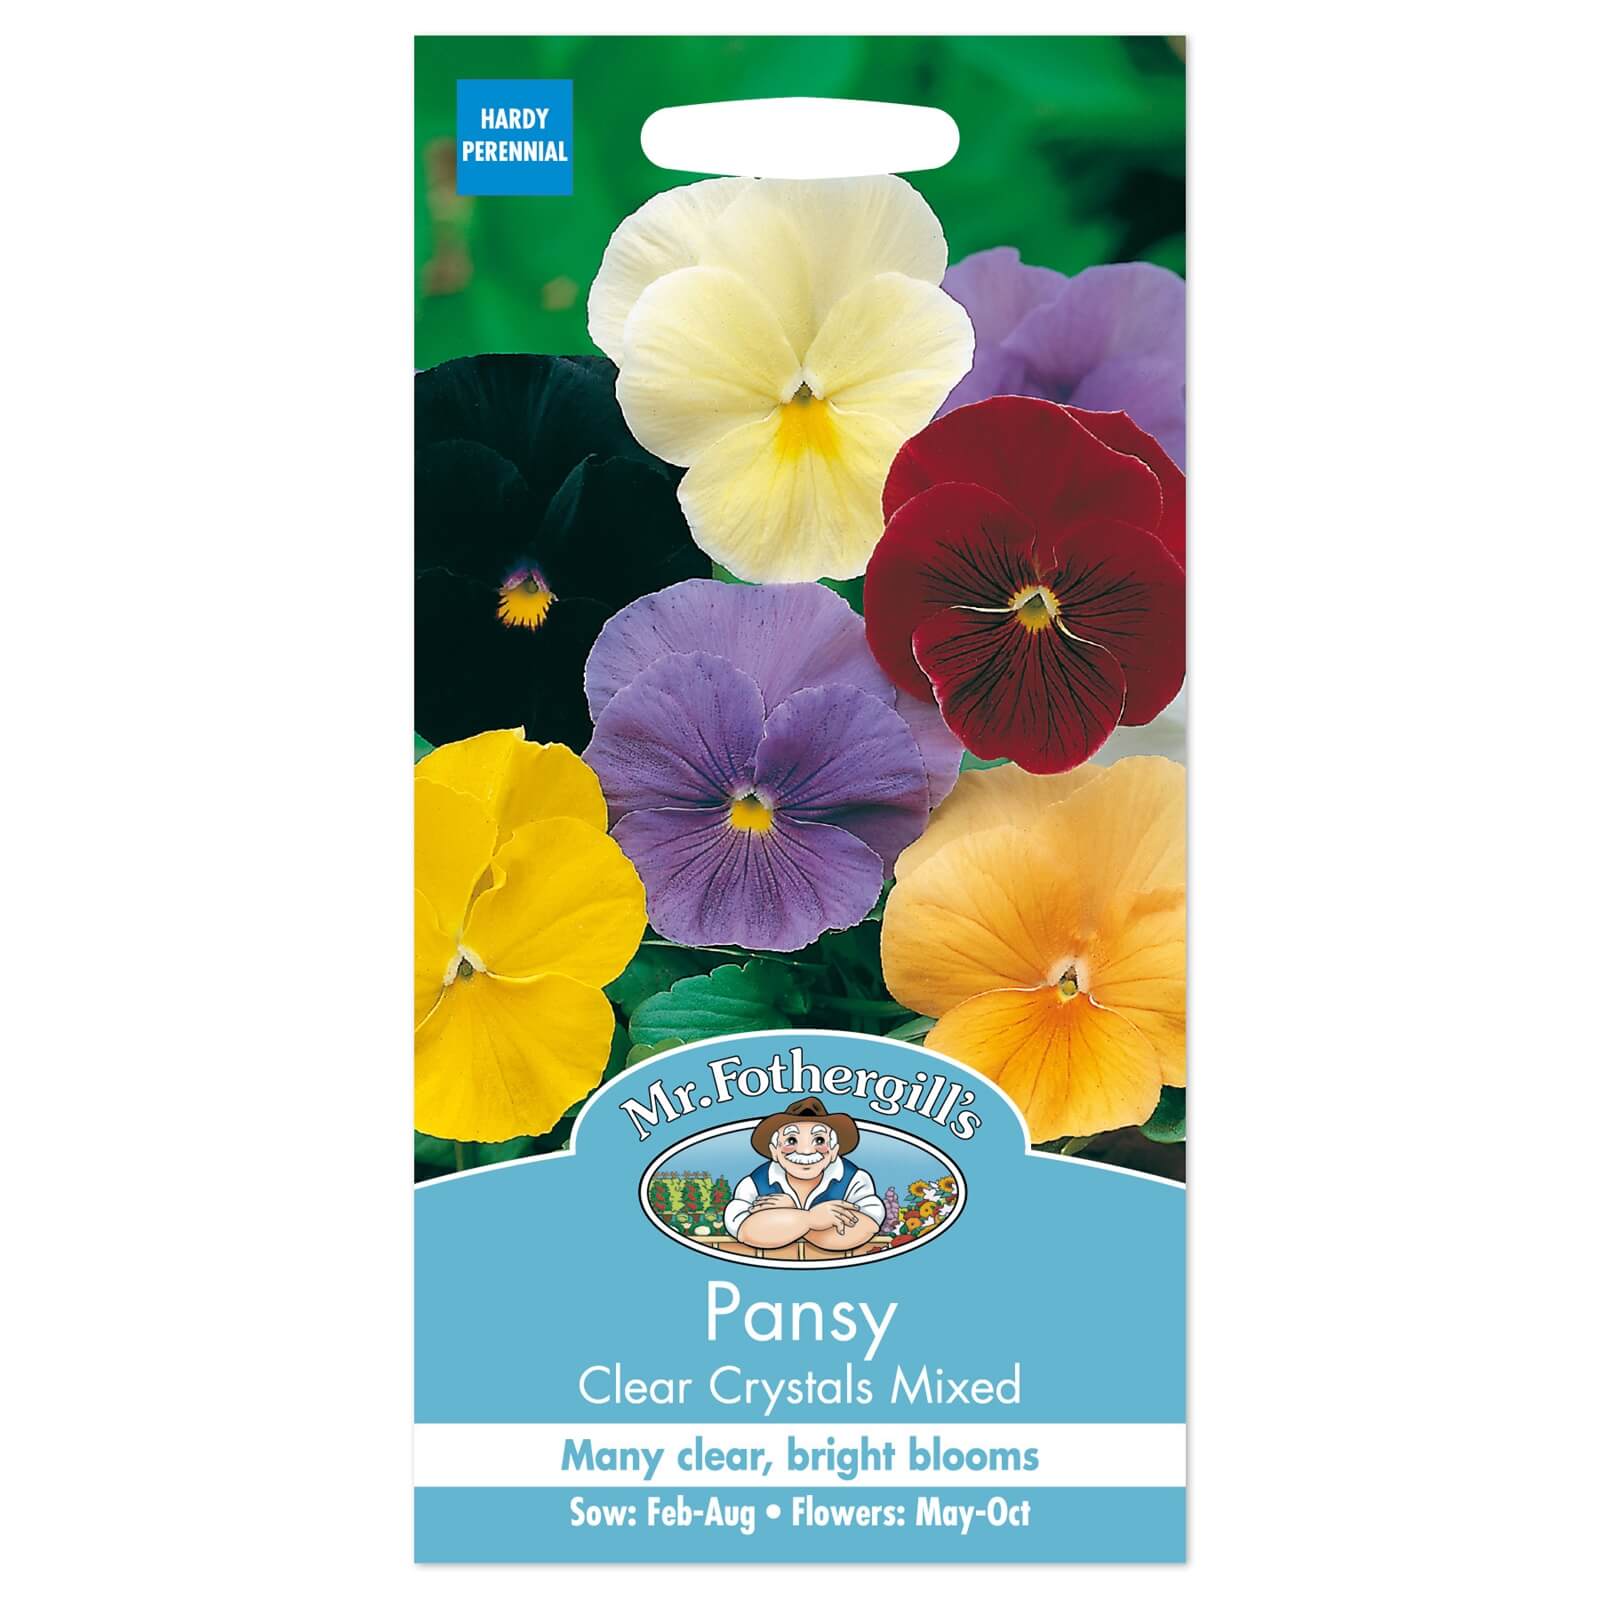 Mr. Fothergill's Pansy Clear Crystals Mixed Seeds